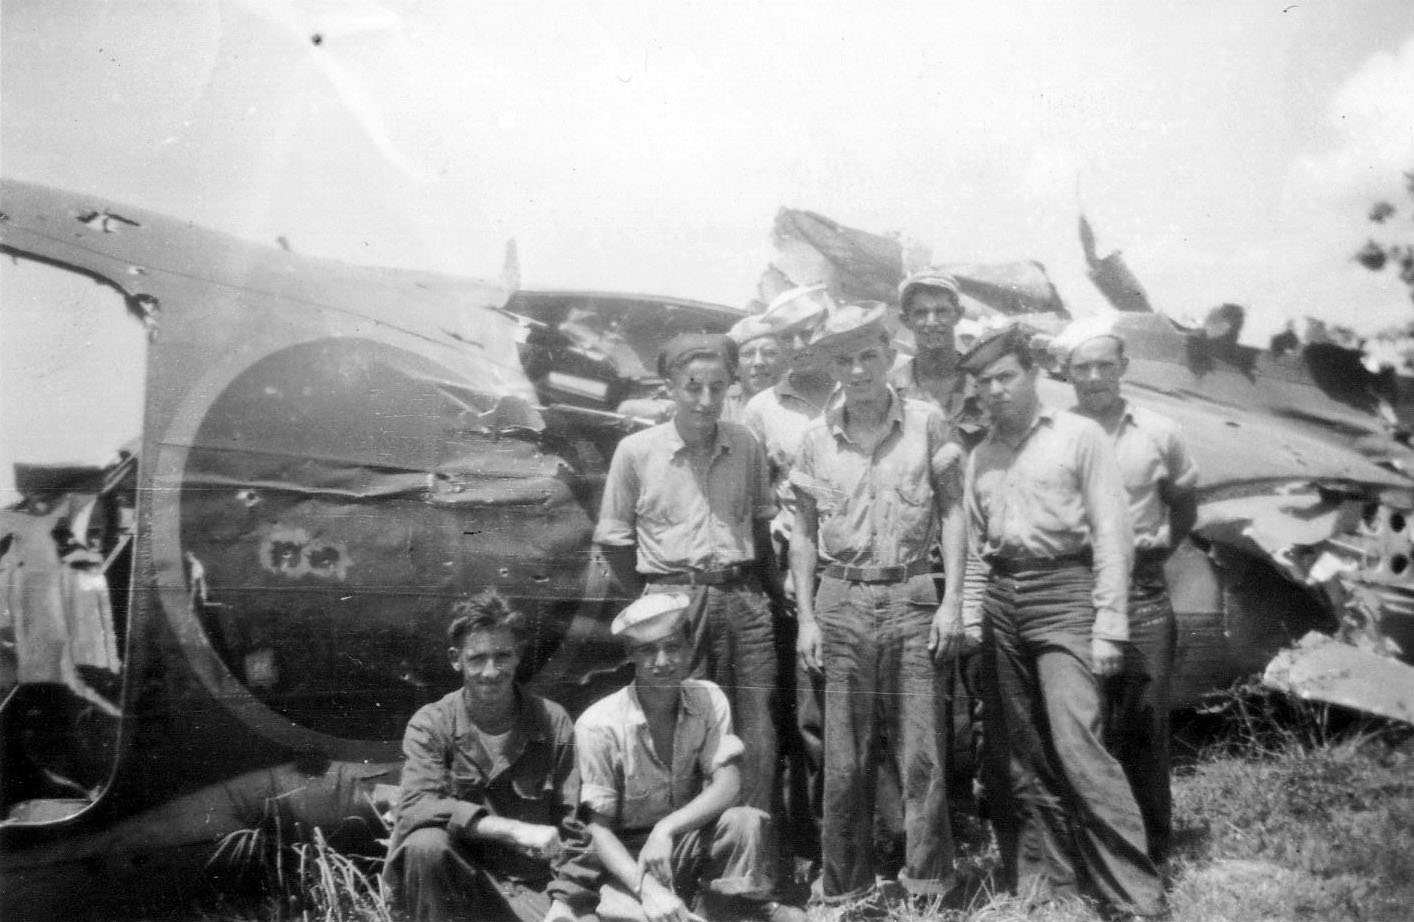 Destroyed Japanese Mitsubishi G4M-1 “Betty” bomber.<br>Standing rear: C. Angevine, [unknown], [unknown], P Withers.<br>Standing front: W. Biers, [unknown], C. Brannon.<br>Sitting: [unknown], [unknown].